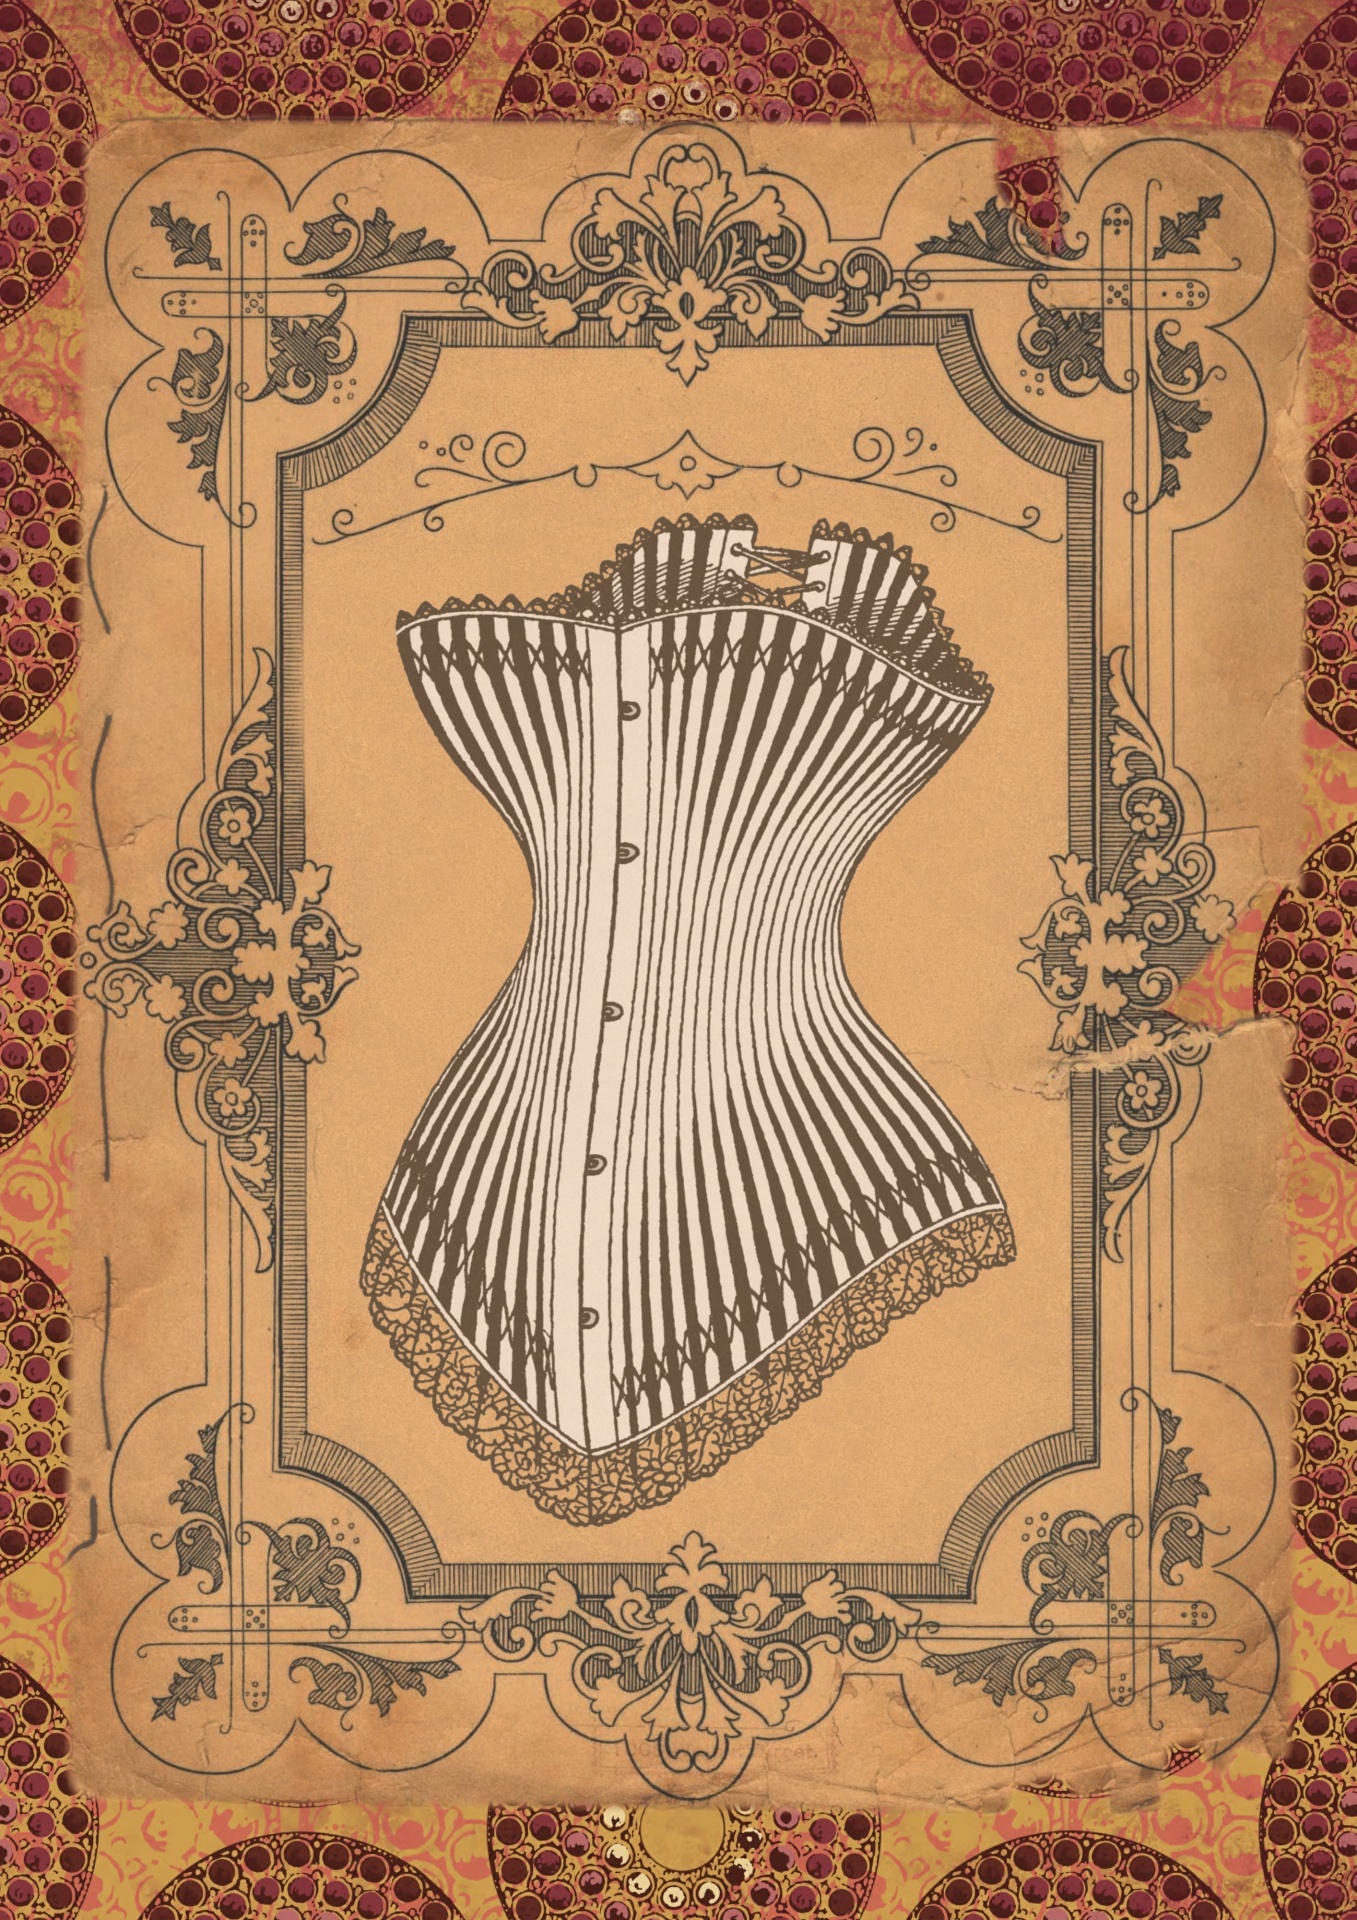 The History Of the Corset 